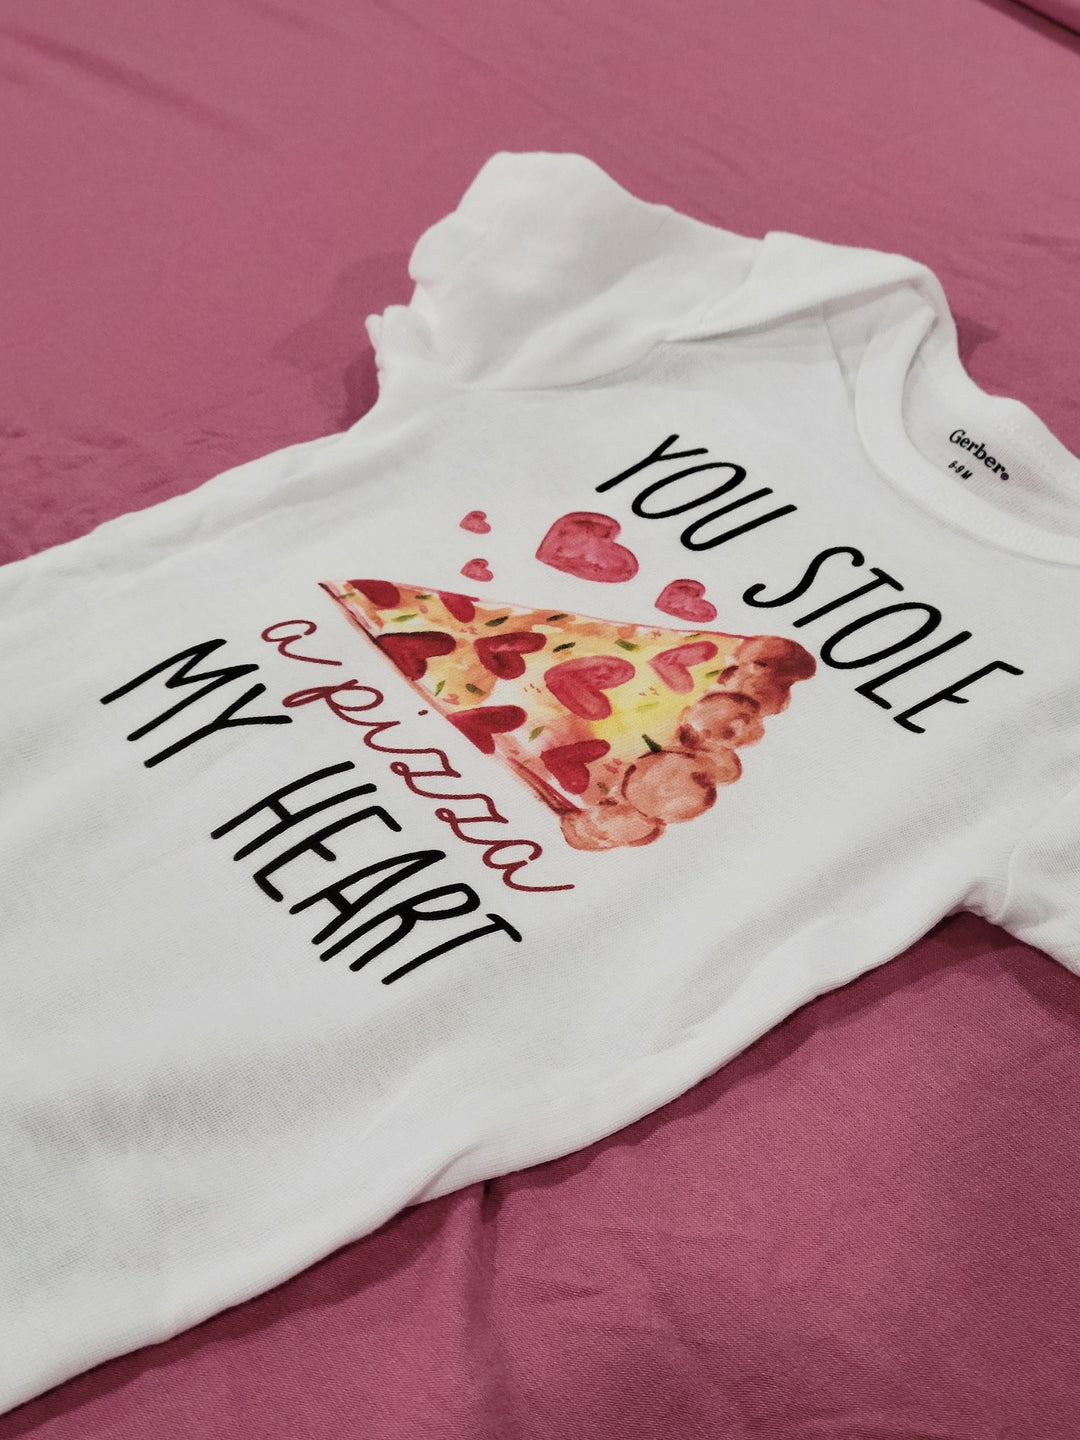 Valentine's Day - Baby Boy Girl Clothes Infant Bodysuit Funny Cute Newborn 1A